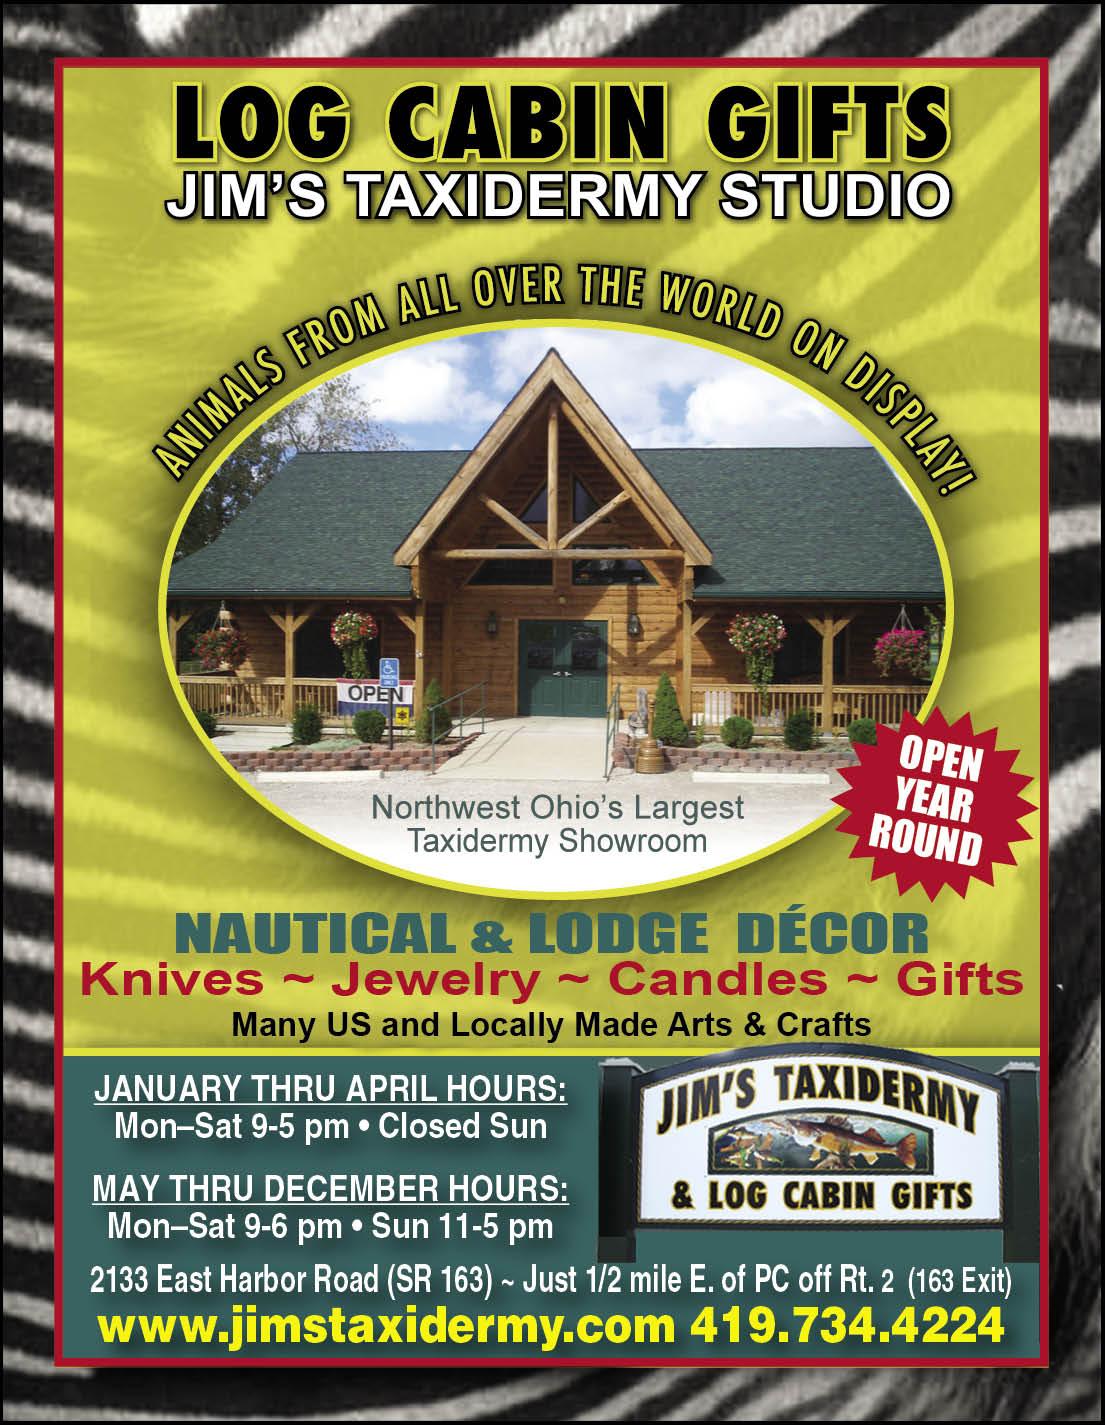 Jim’s Taxidermy & Log Cabin Gifts